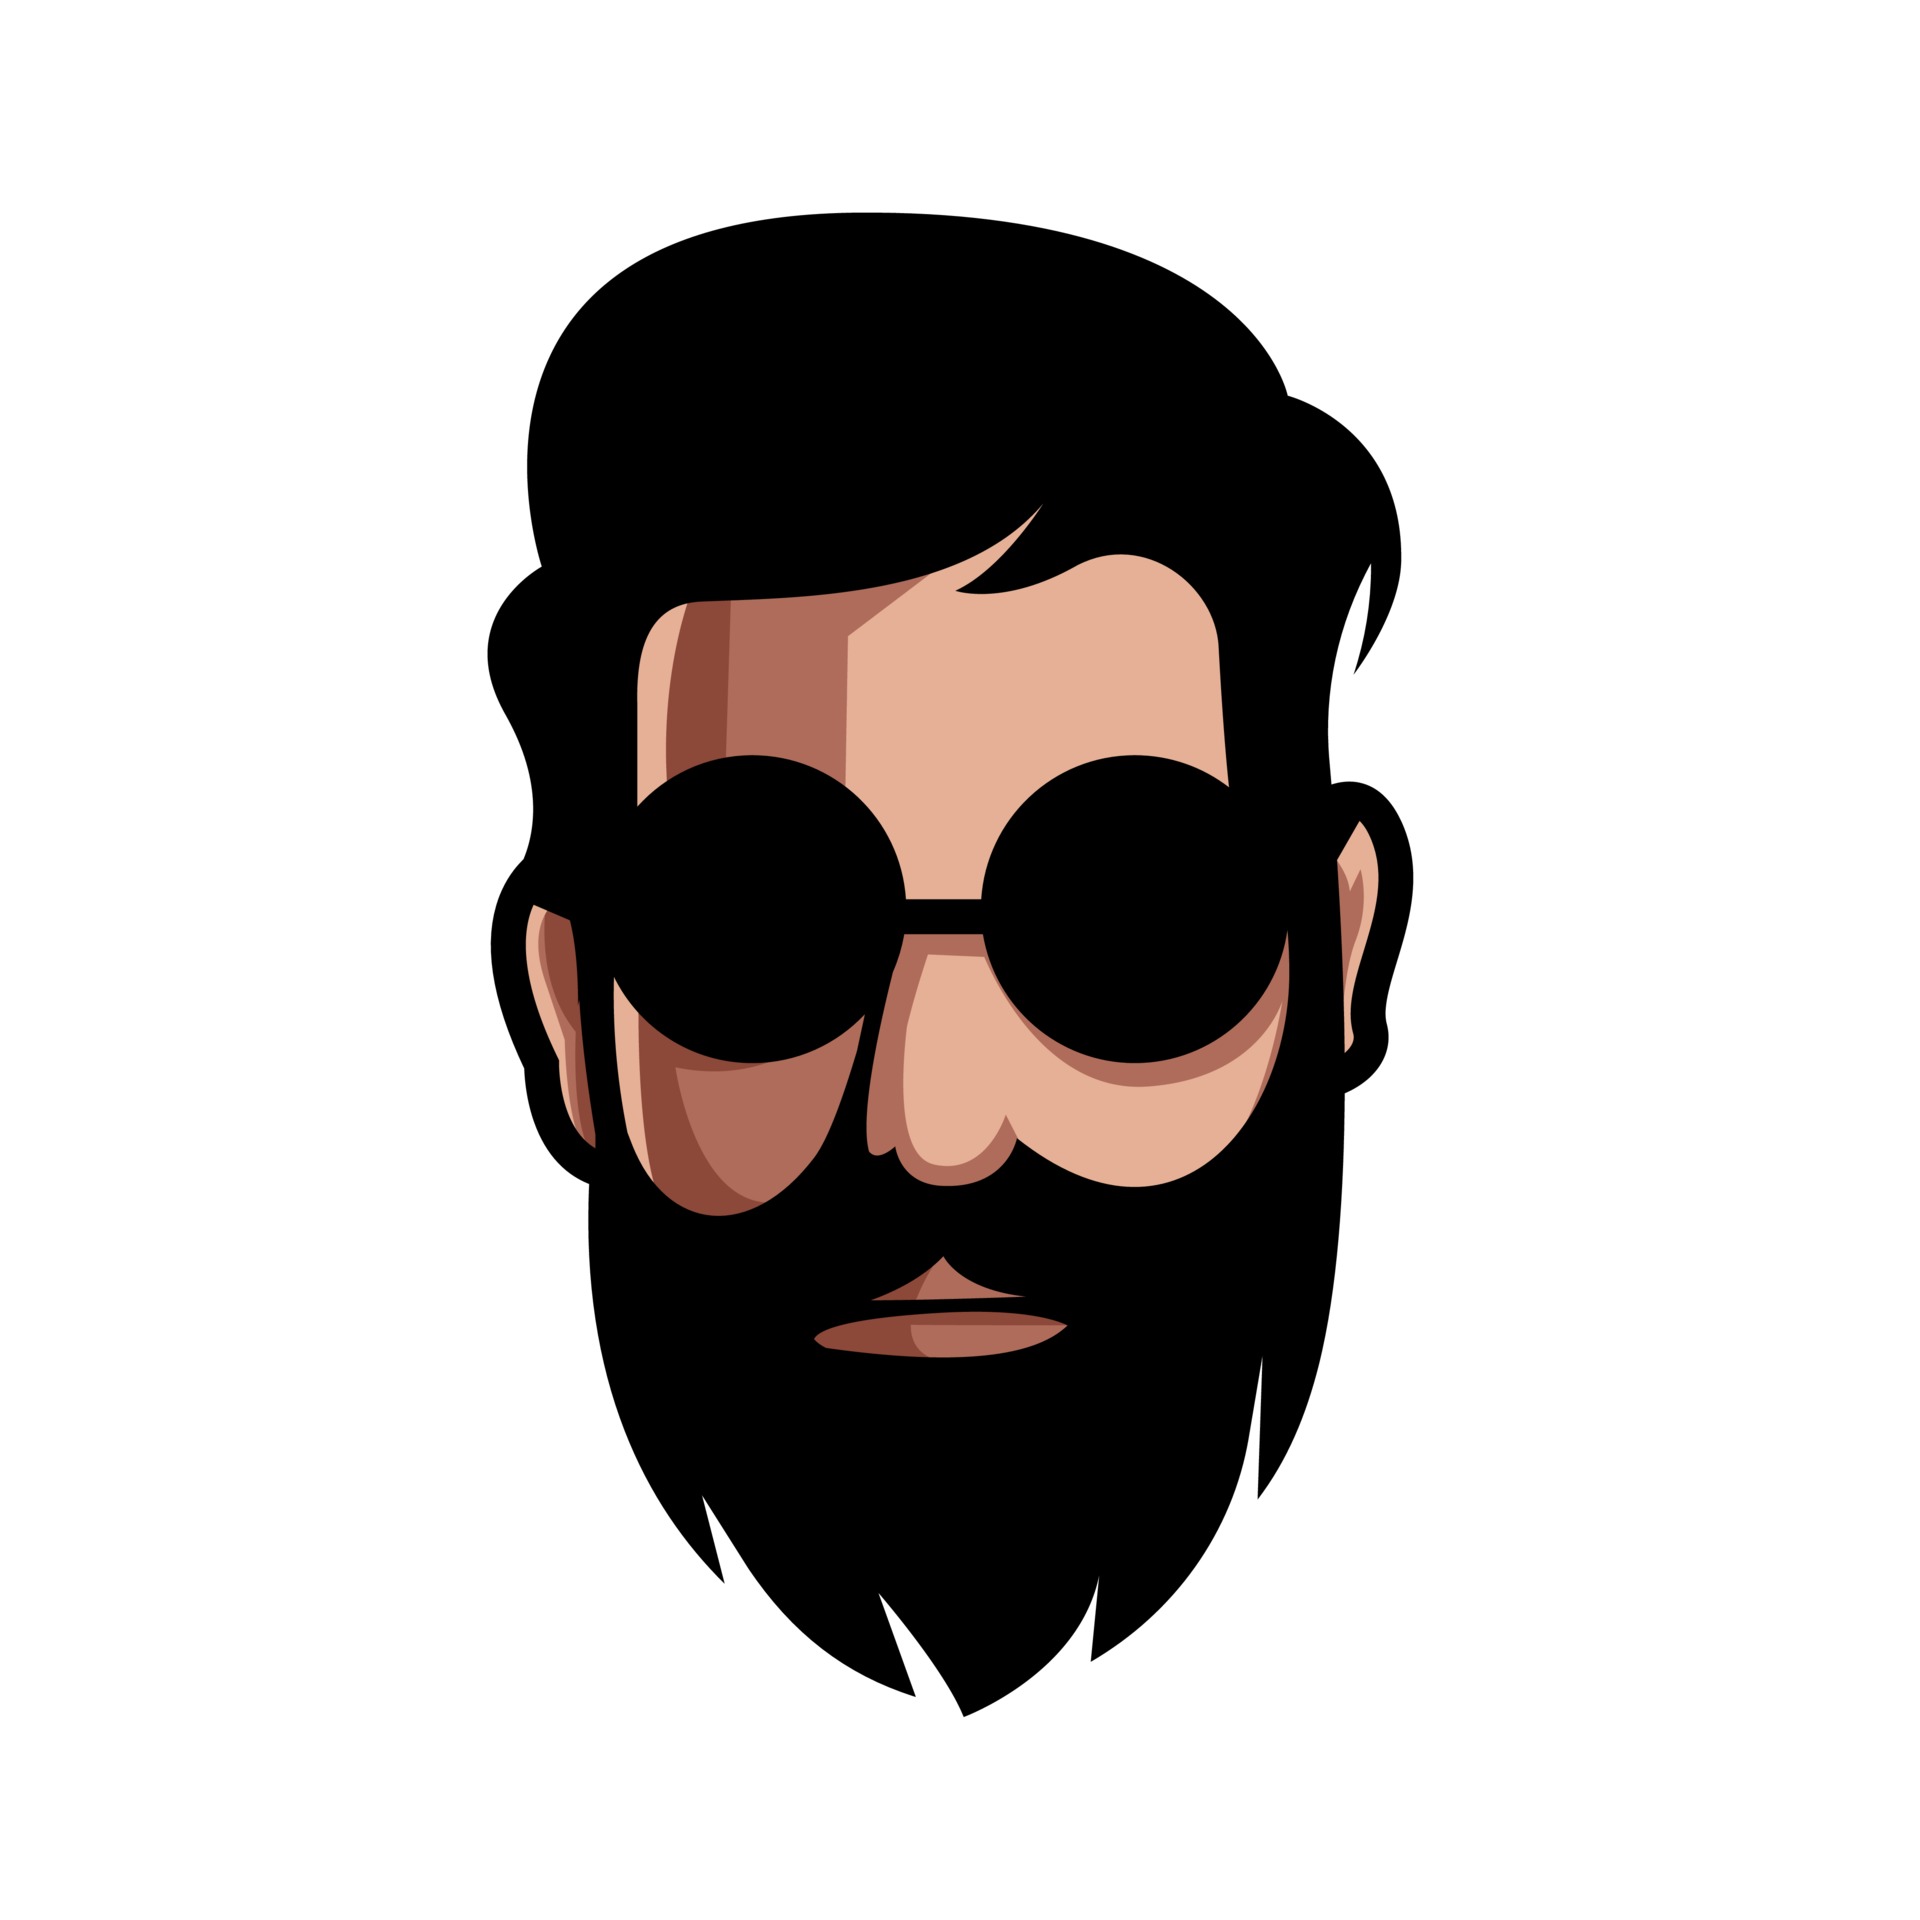 Beard Man Vector Art, Icons, and Graphics for Free Download